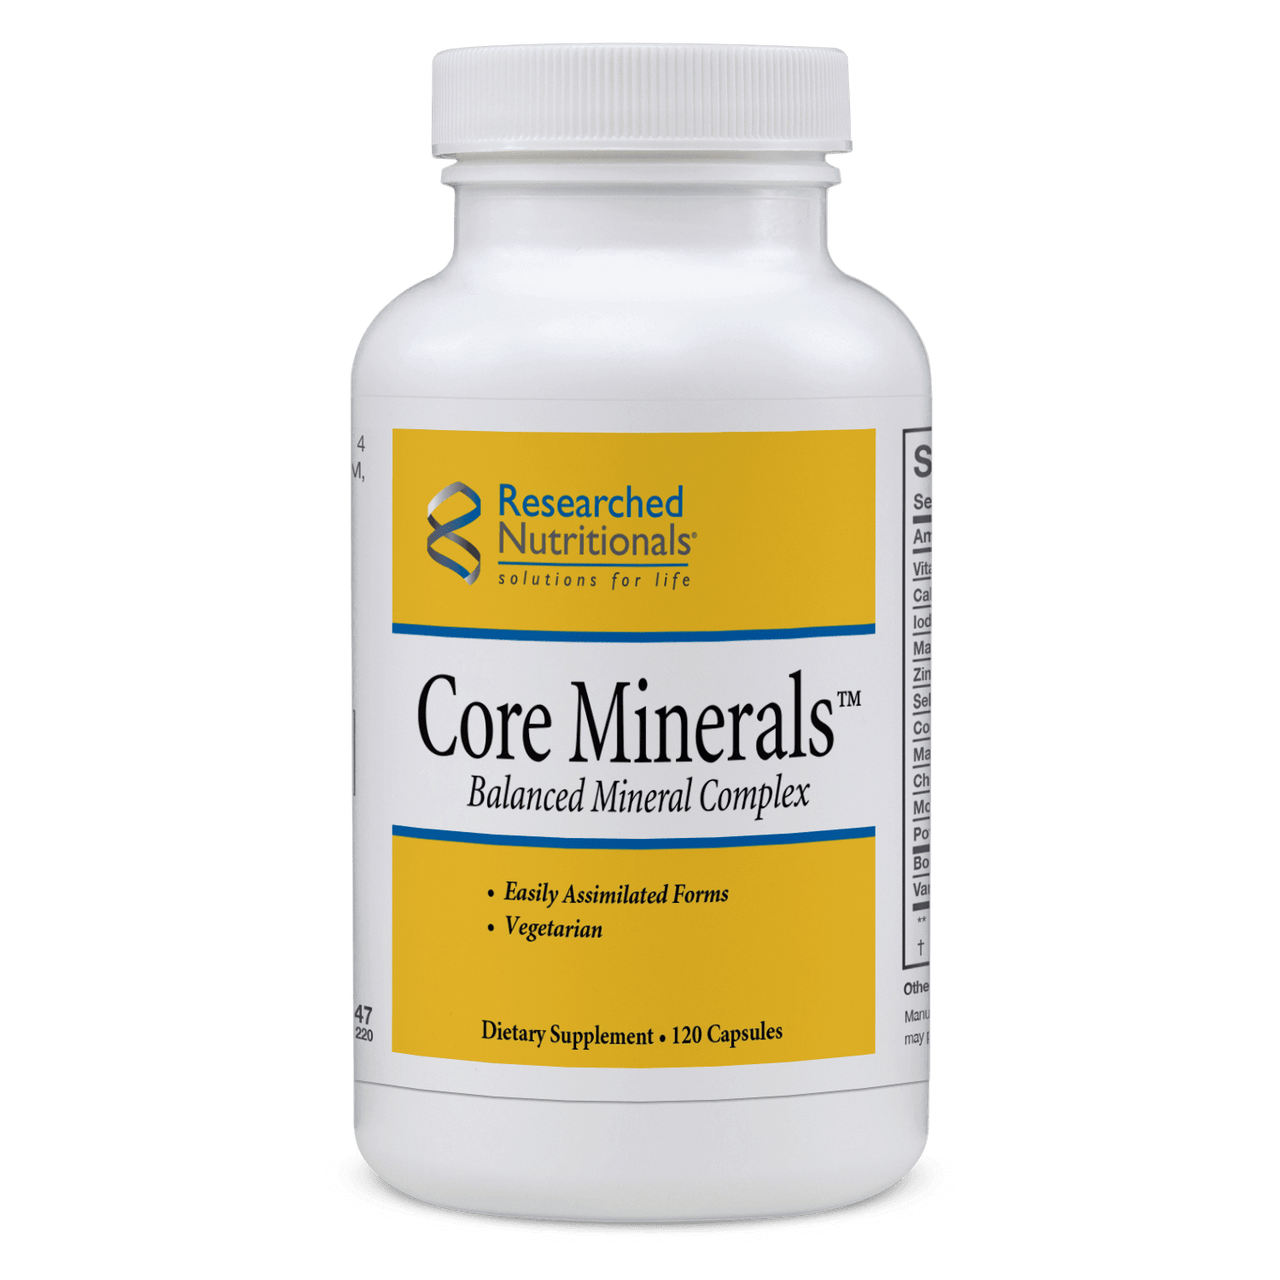 Core Minerals - 120 Capsules Researched Nutritionals Supplement - Conners Clinic